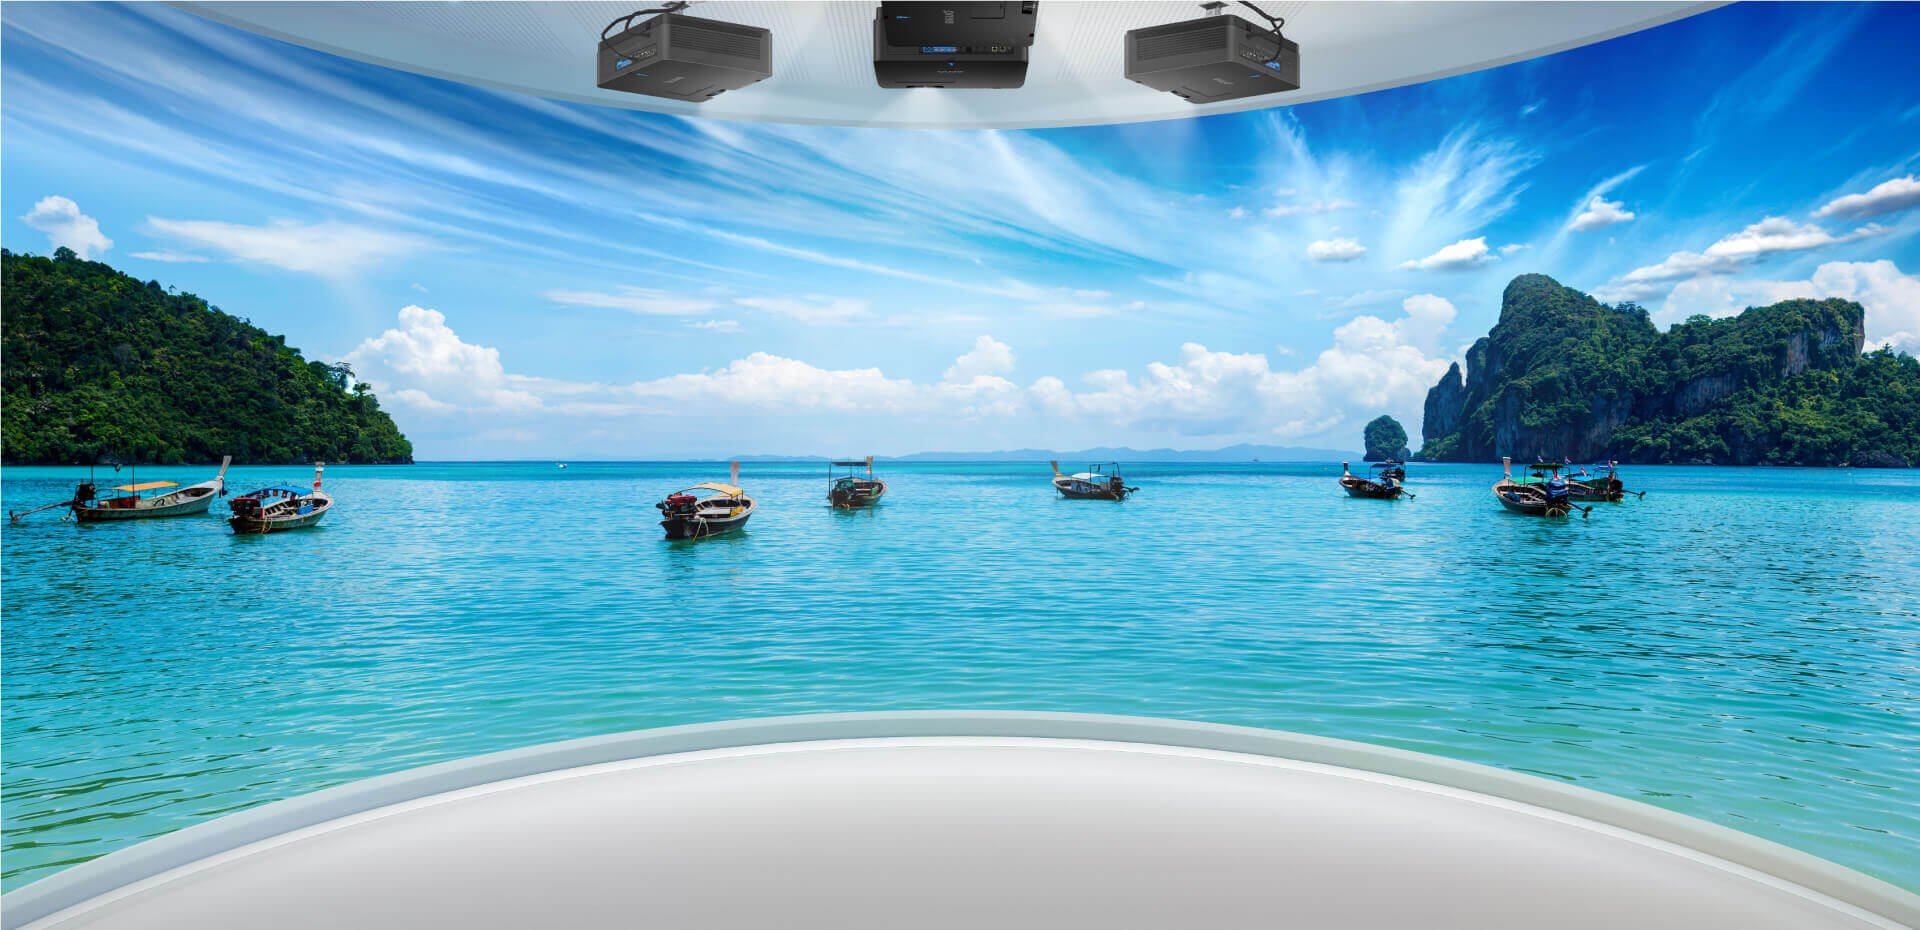 BenQ LU9750 Large Venue Projector with exclusive white balance adjustments can reduce white balance variables between images projected from different projectors